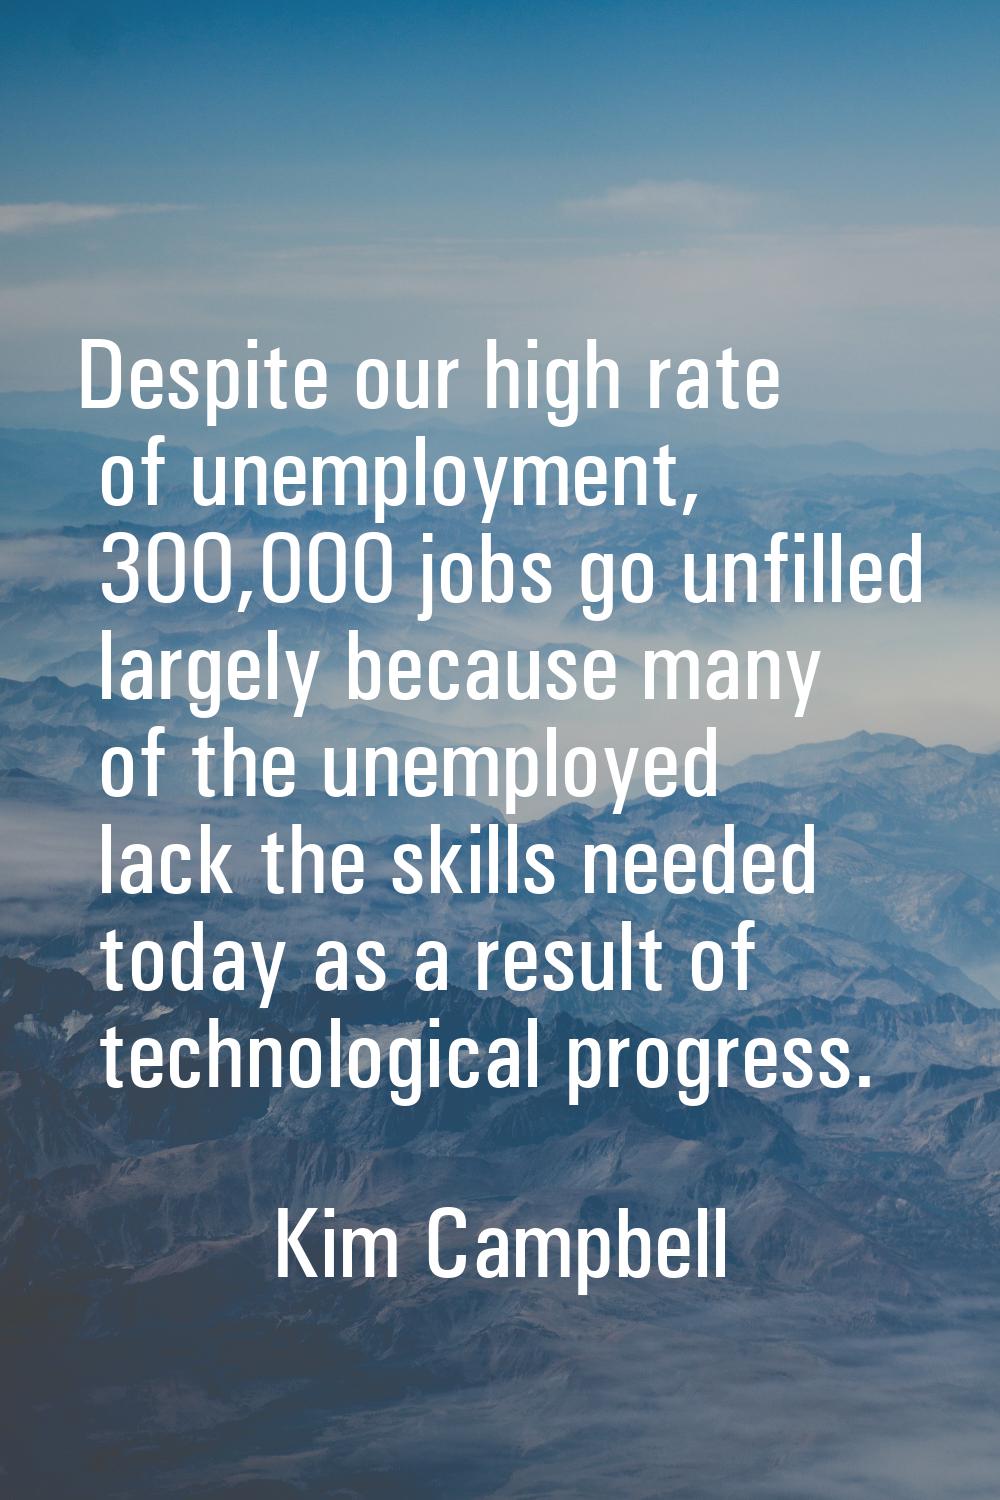 Despite our high rate of unemployment, 300,000 jobs go unfilled largely because many of the unemplo